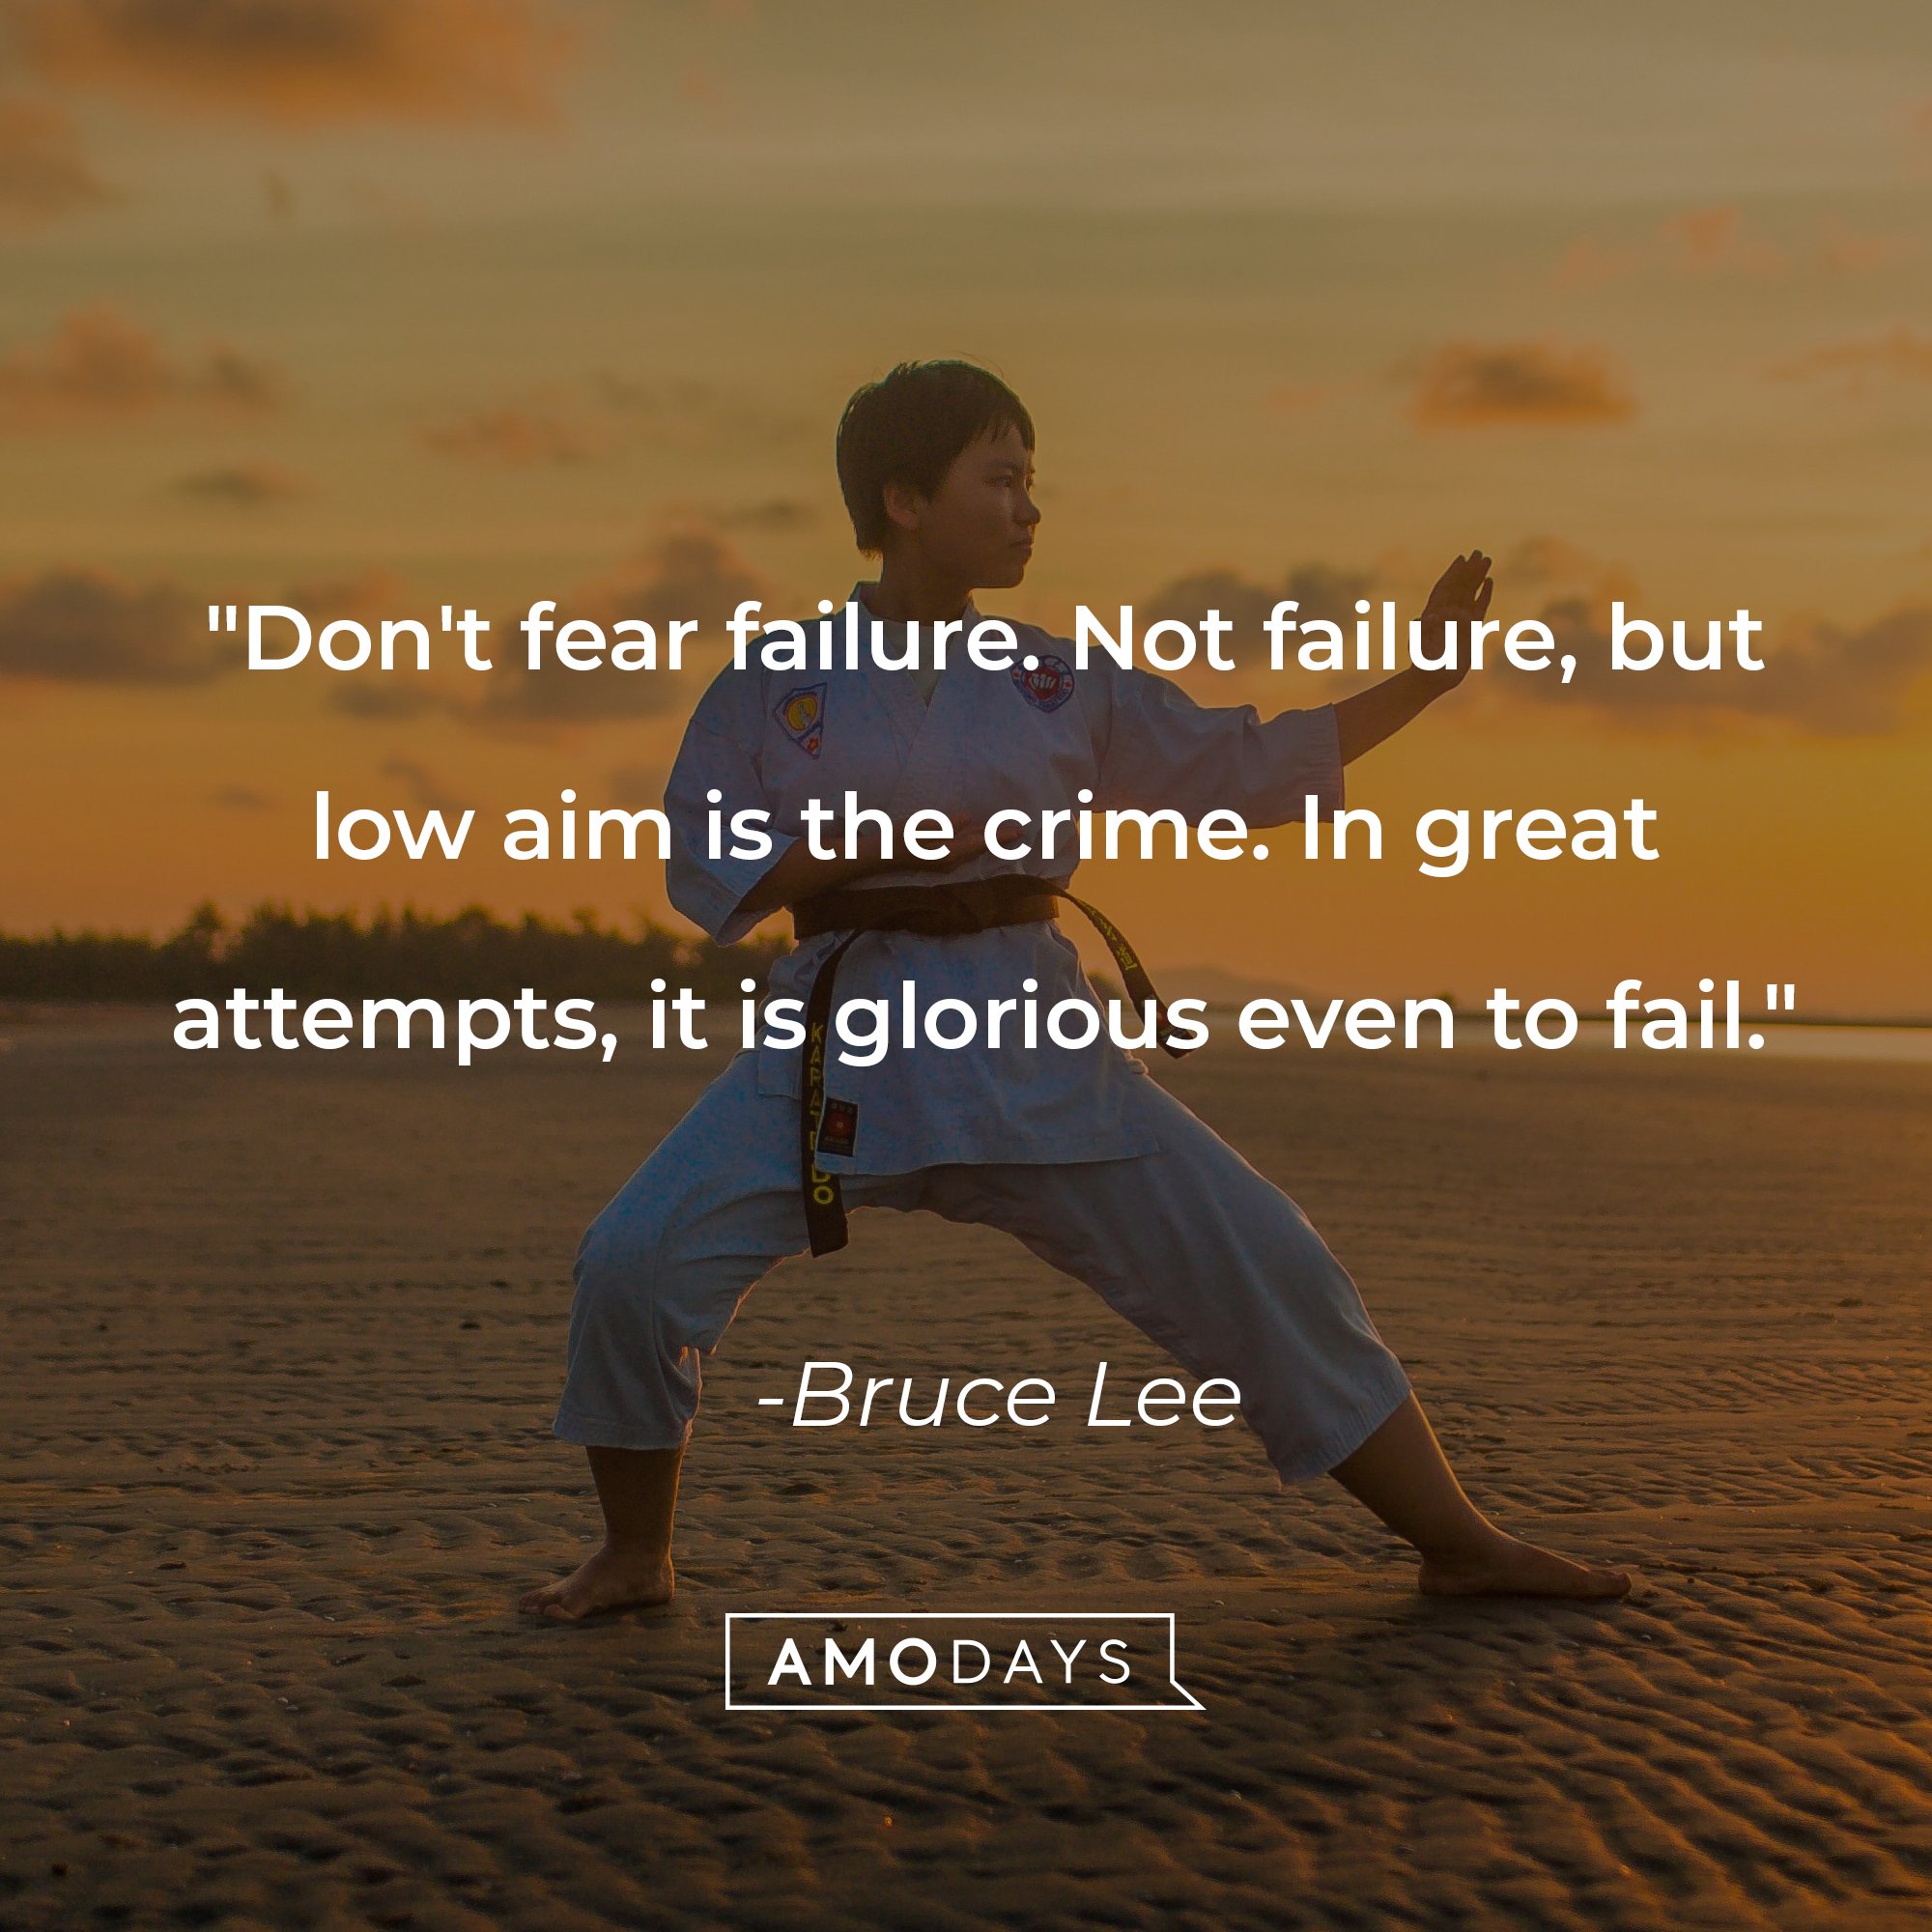 Bruce Lee’s quote: "Don't fear failure. Not failure, but low aim is the crime. In great attempts, it is glorious even to fail." | Image: AmoDays   